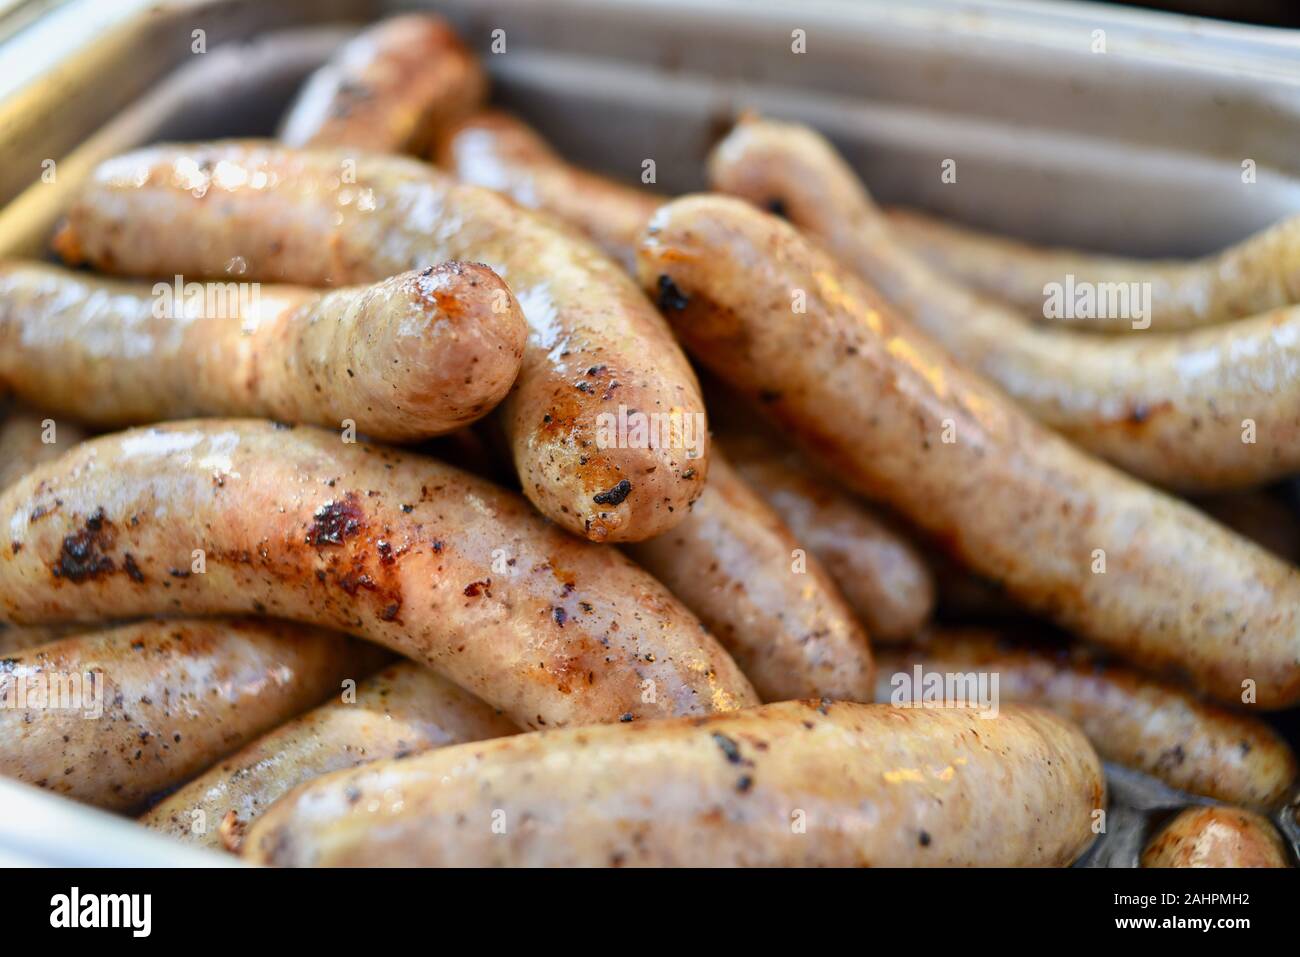 Grilled bratwurst sausages piled up in a serving tray for sale at Oktoberfest held in the Swiss-American community of New Glarus, Wisconsin, USA. Stock Photo